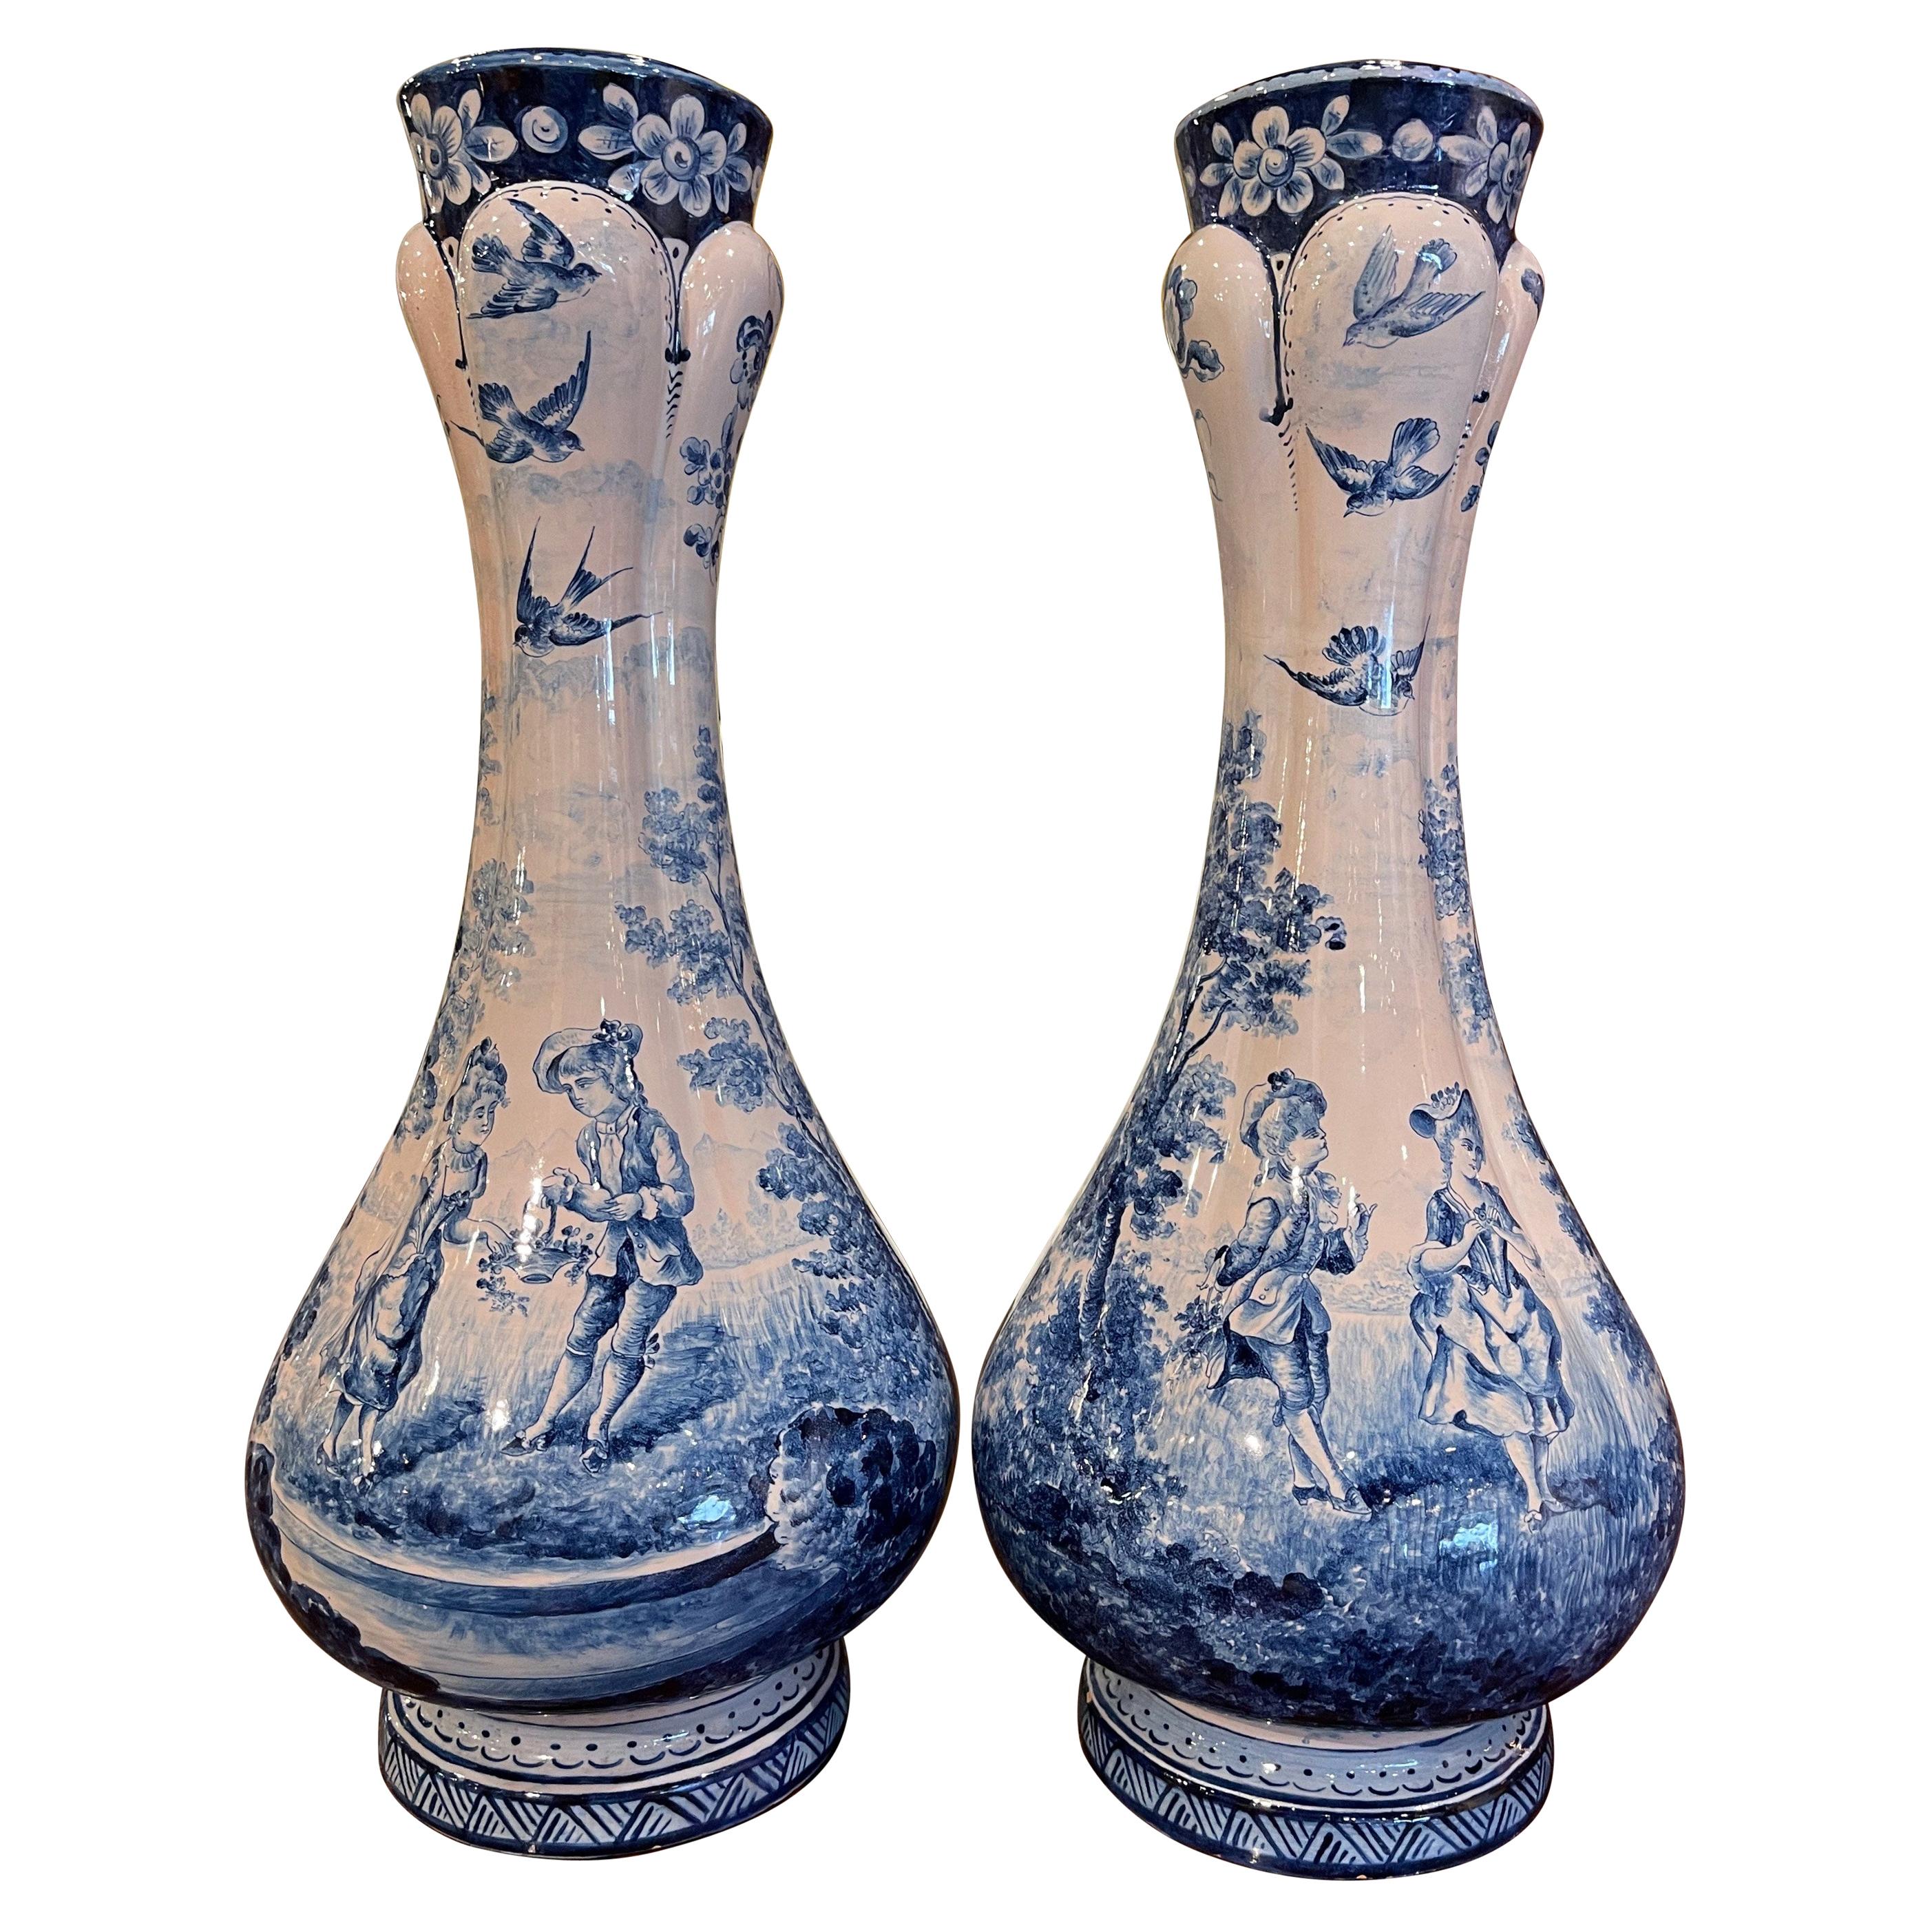 Pair of 19th Century French Delft Style Faience Vases with Blue and White Decor